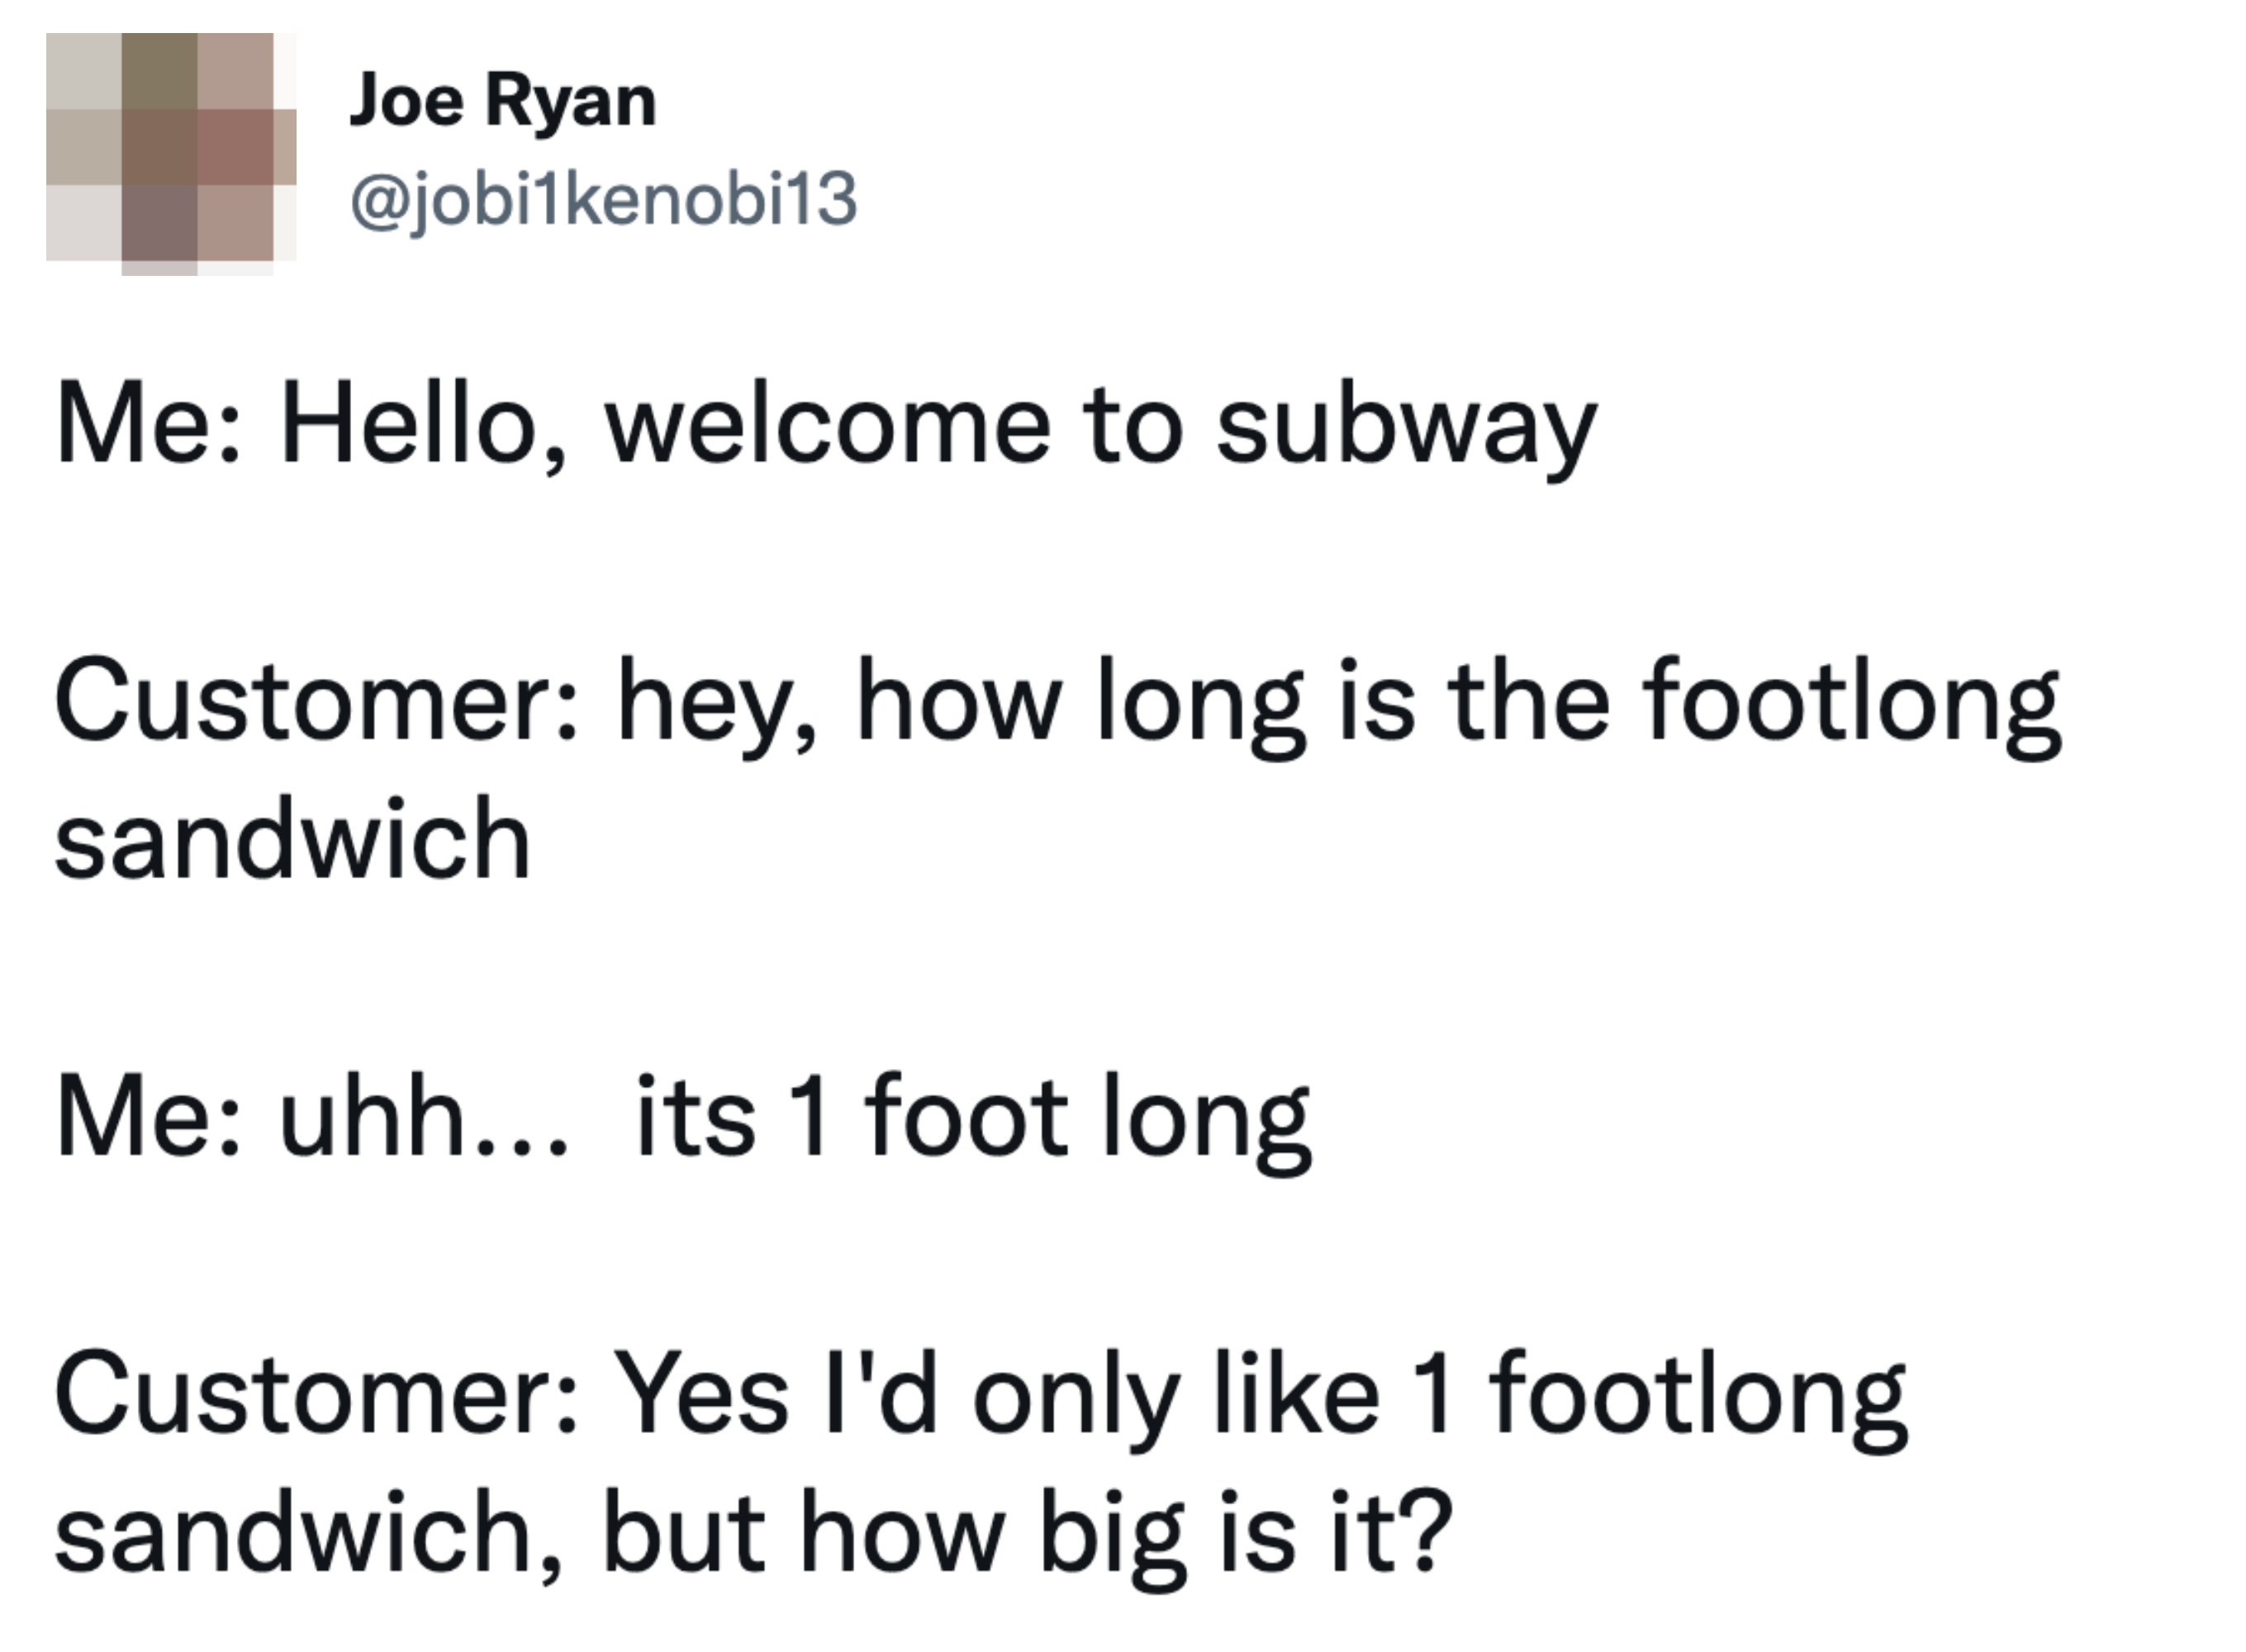 customer does not understand that a footlong means foot